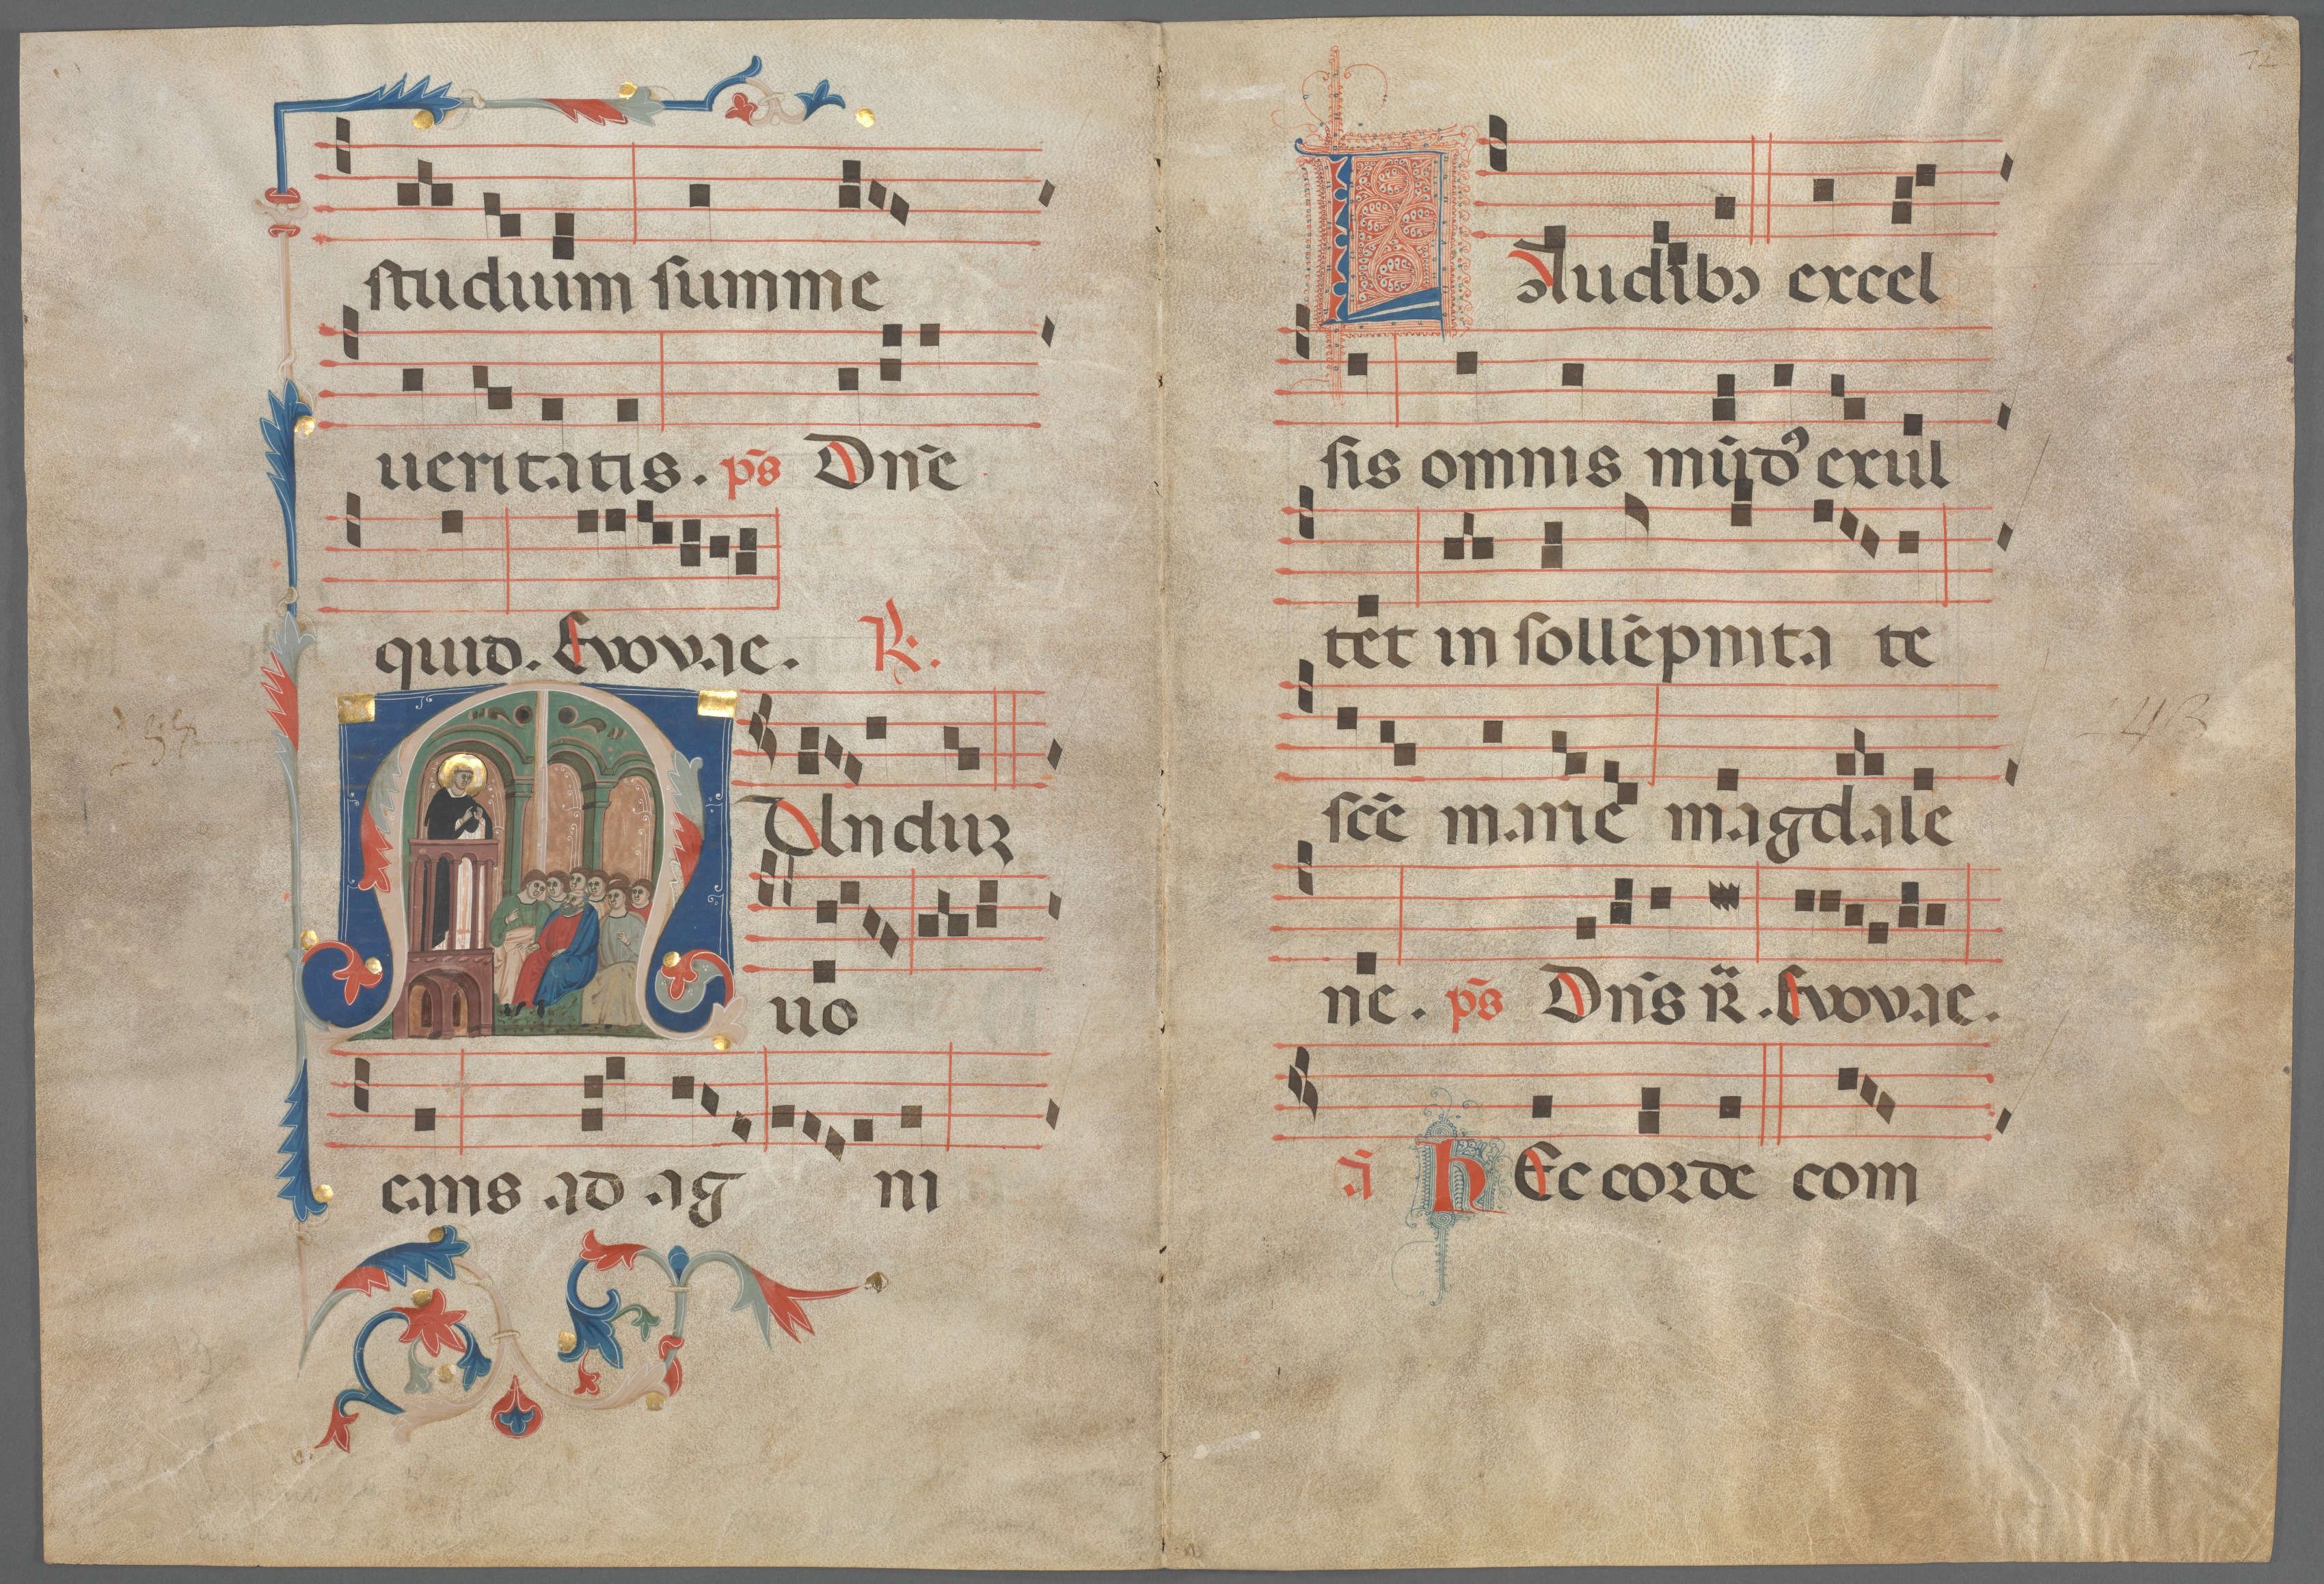 Bifolium from an Antiphonary: Initial M with Saint Dominic Preaching and Music